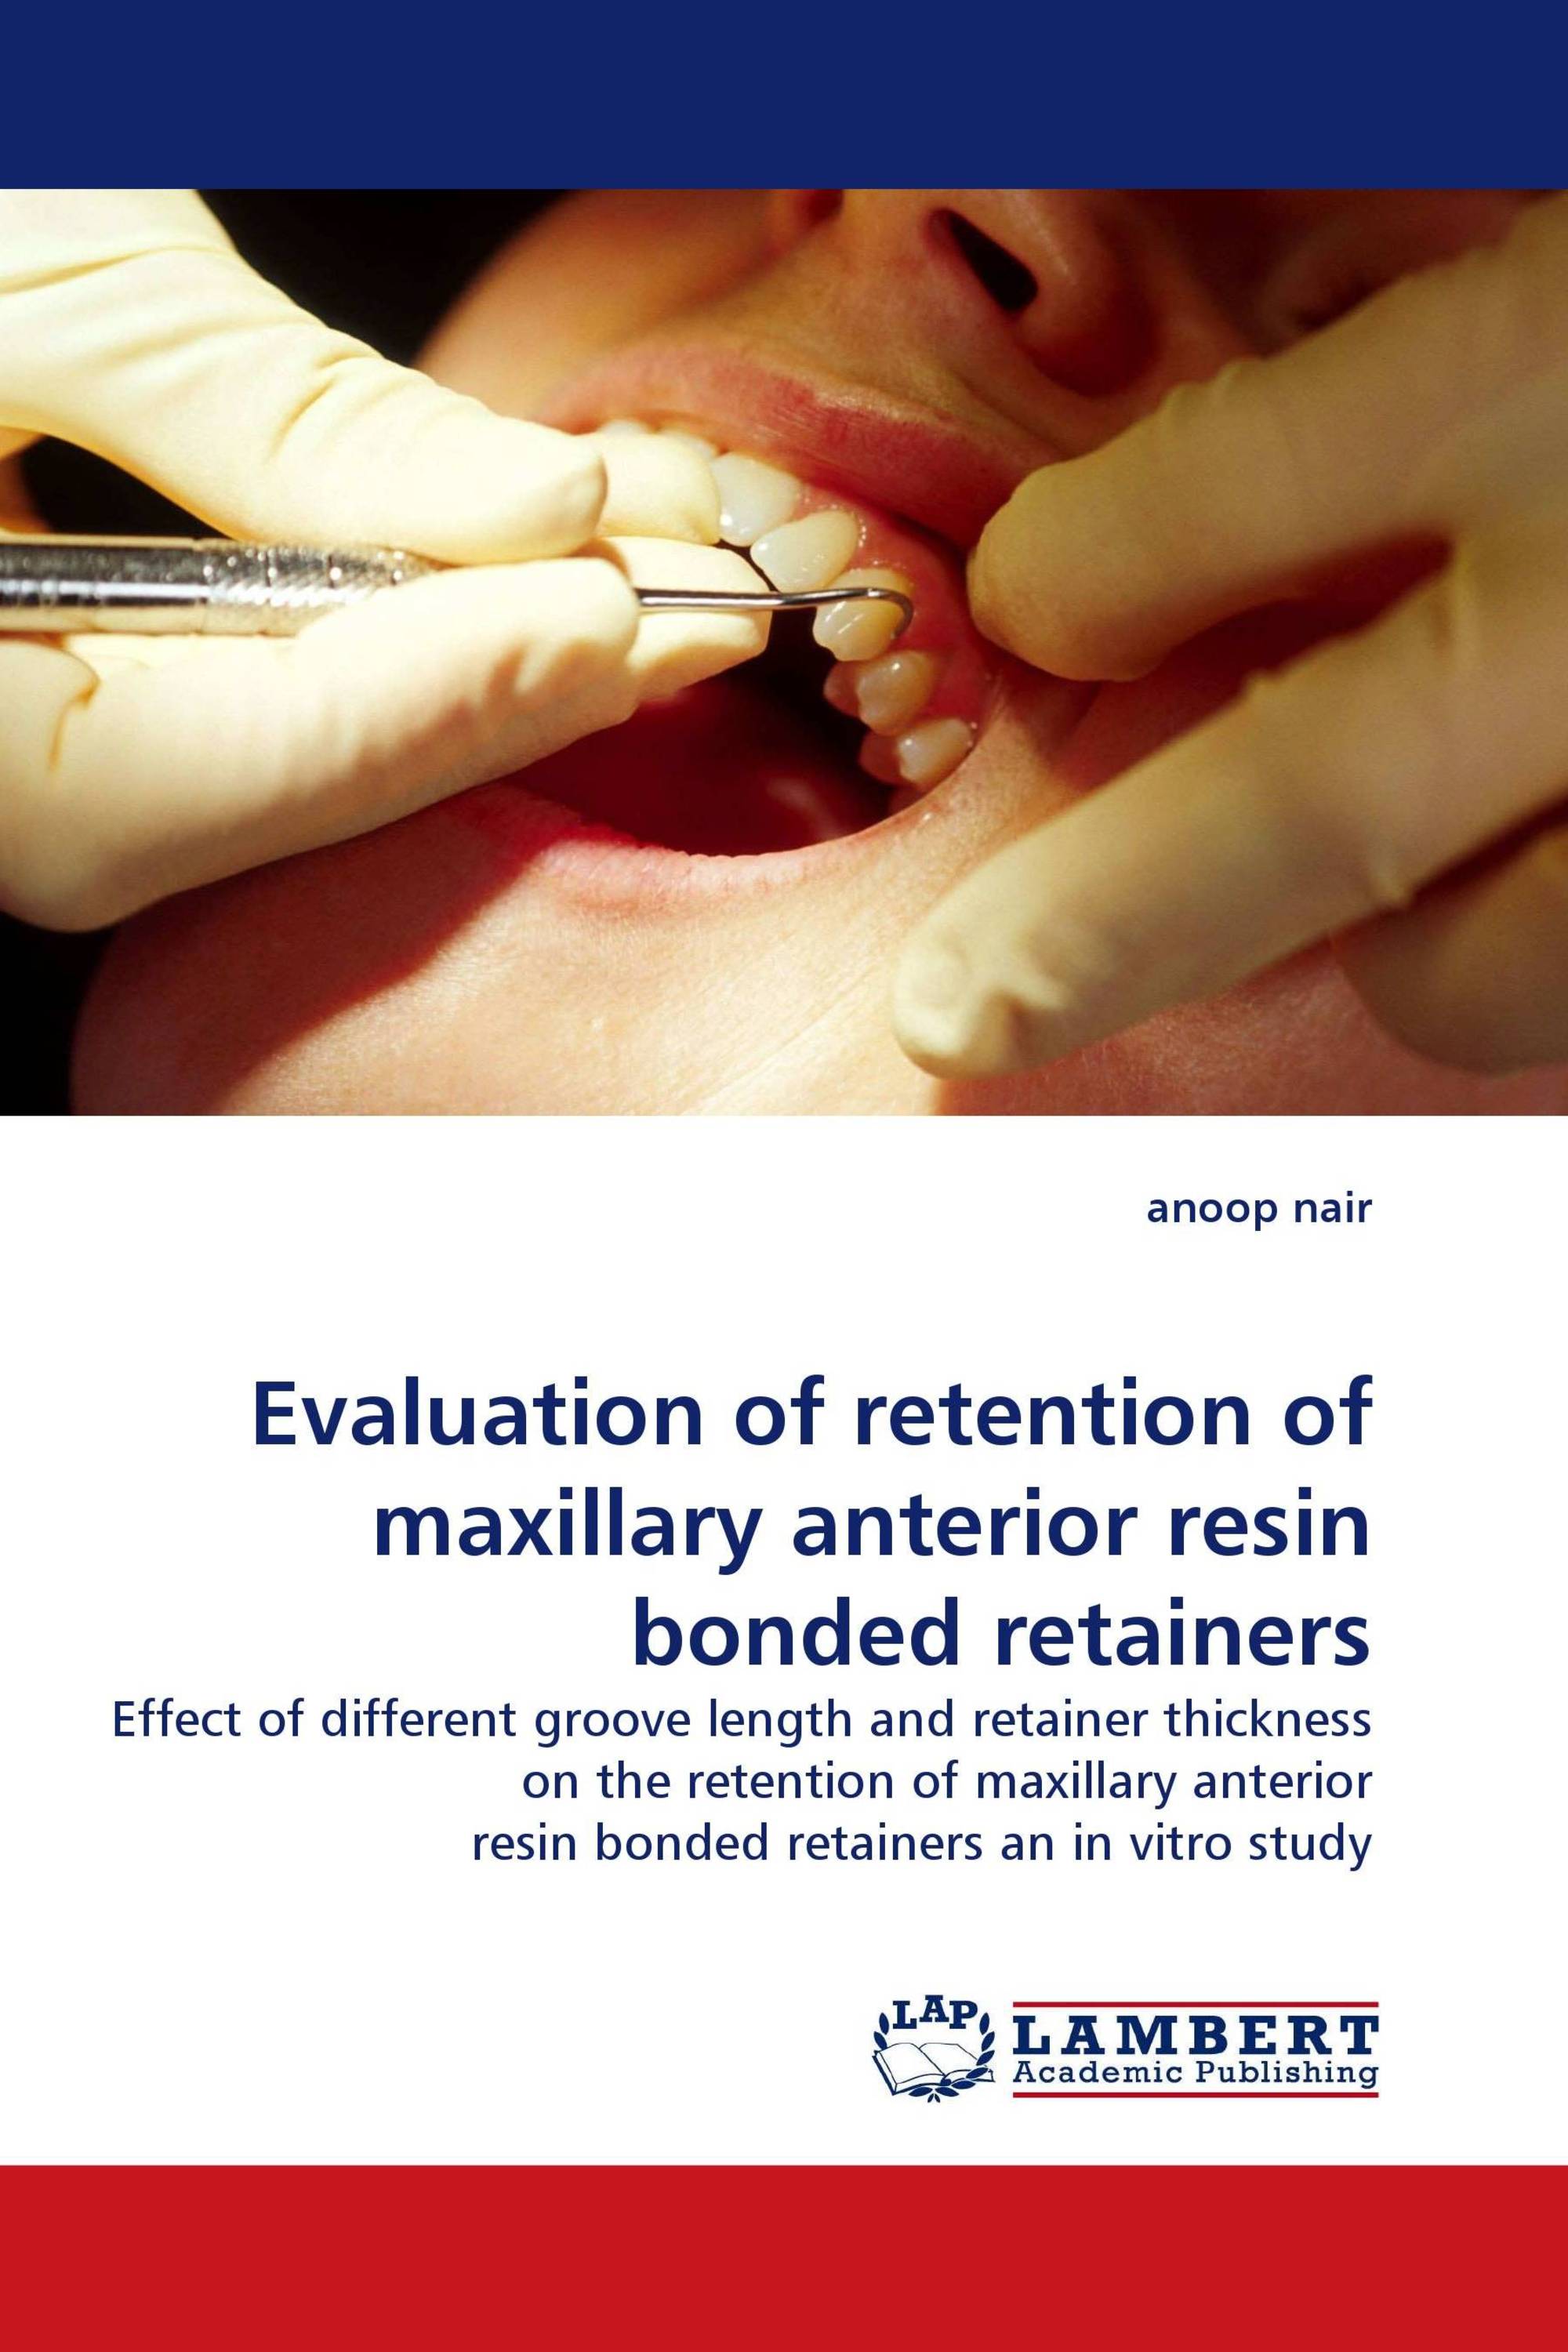 Evaluation of retention of maxillary anterior resin bonded retainers